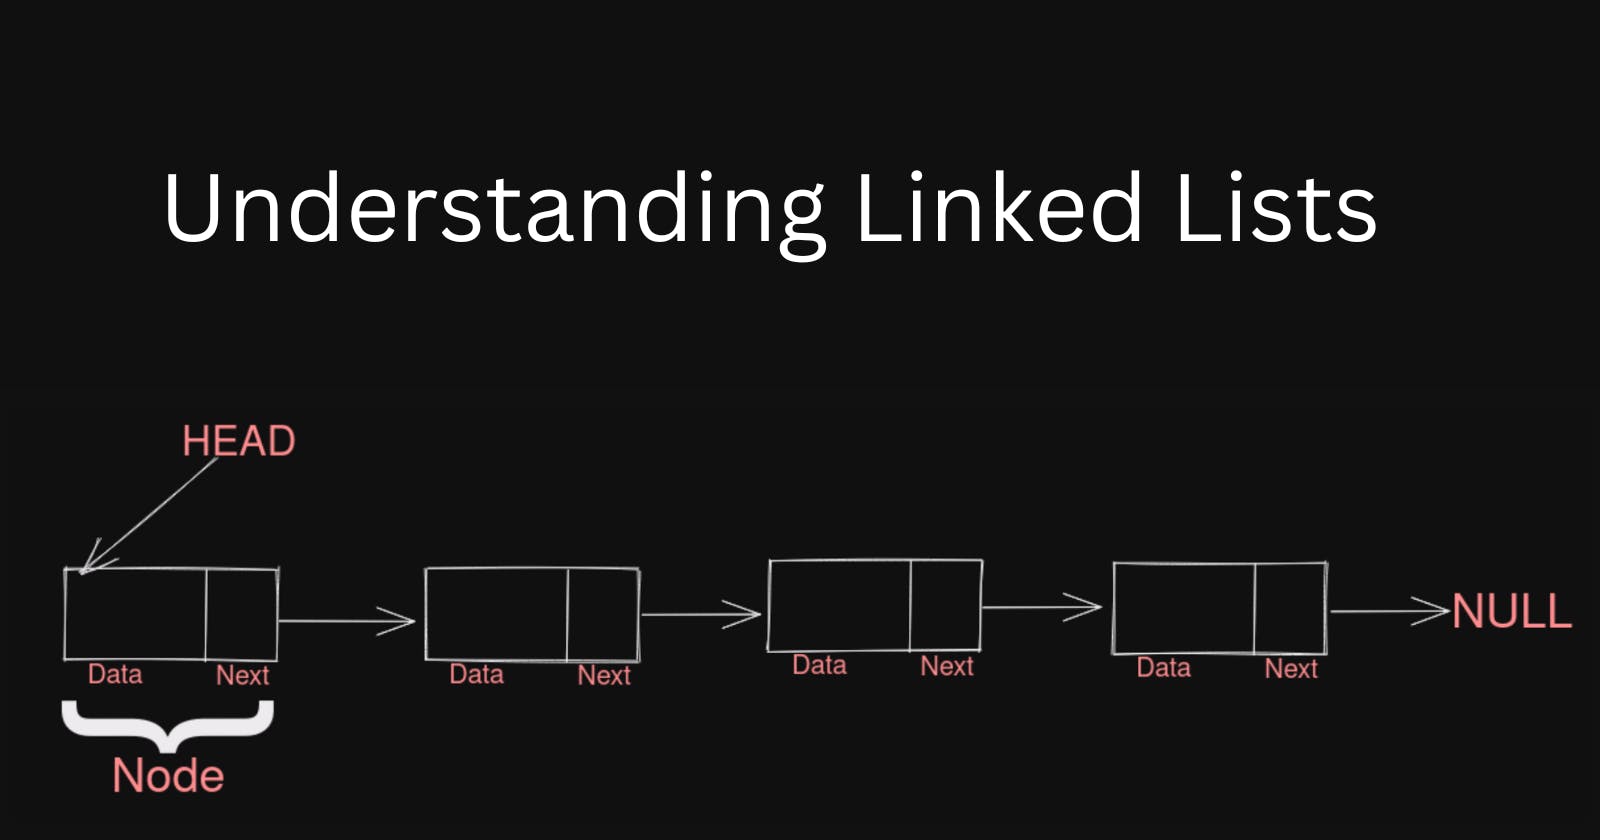 Linking the Dots: An Introductory Guide to Linked Lists